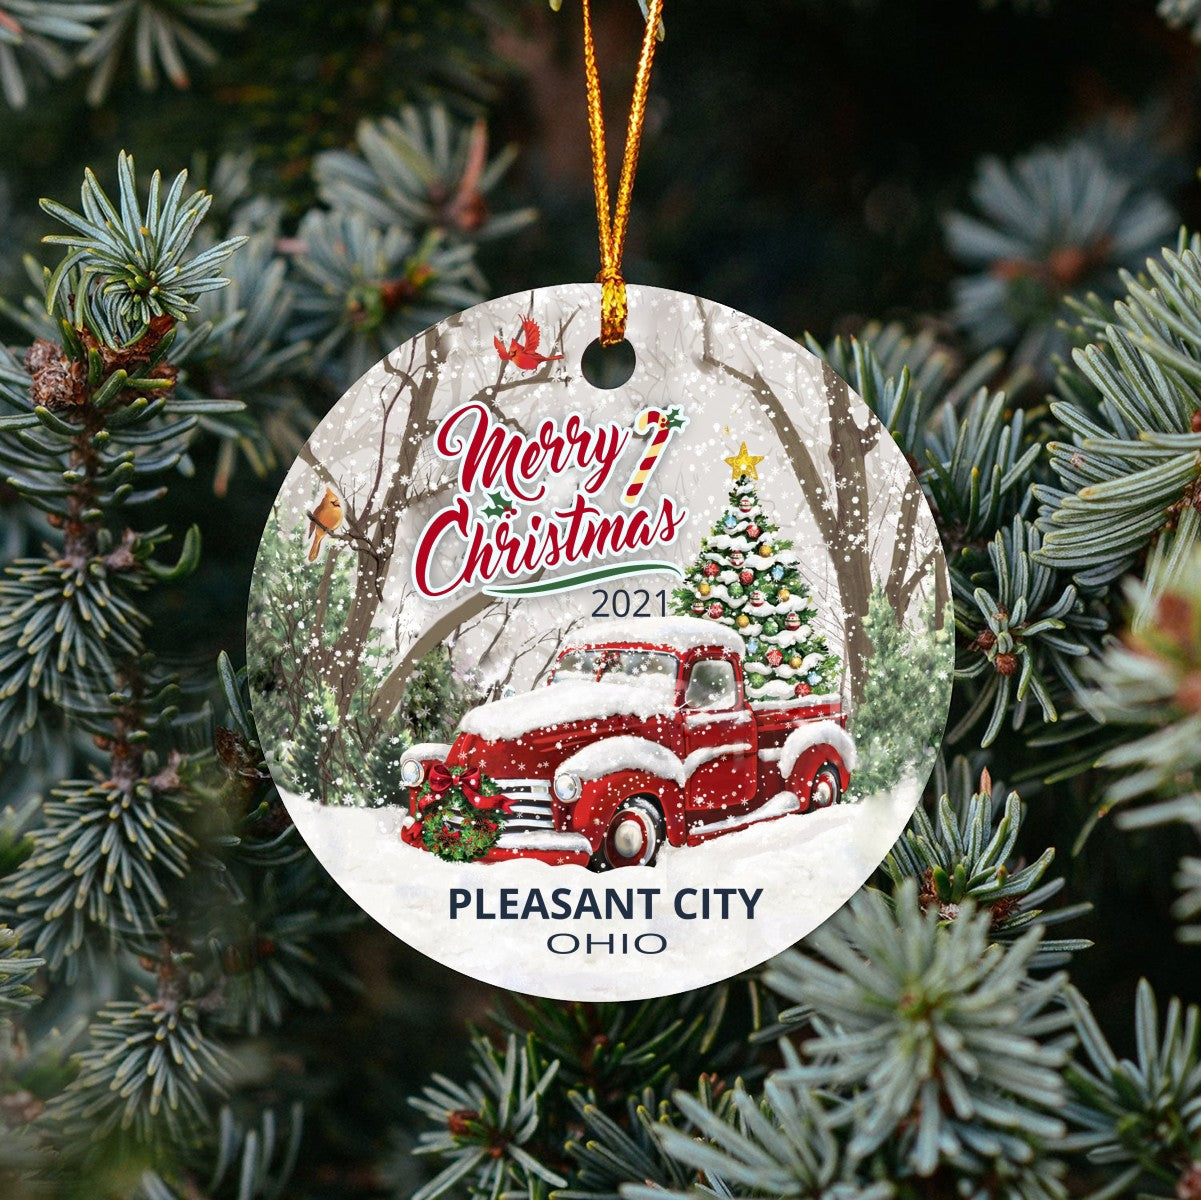 Christmas Tree Ornaments Pleasant City - Ornament Customize With Name City And State Pleasant City Ohio OH - Red Truck Xmas Ornaments 3'' Plastic Gift For Family, Friend And Housewarming